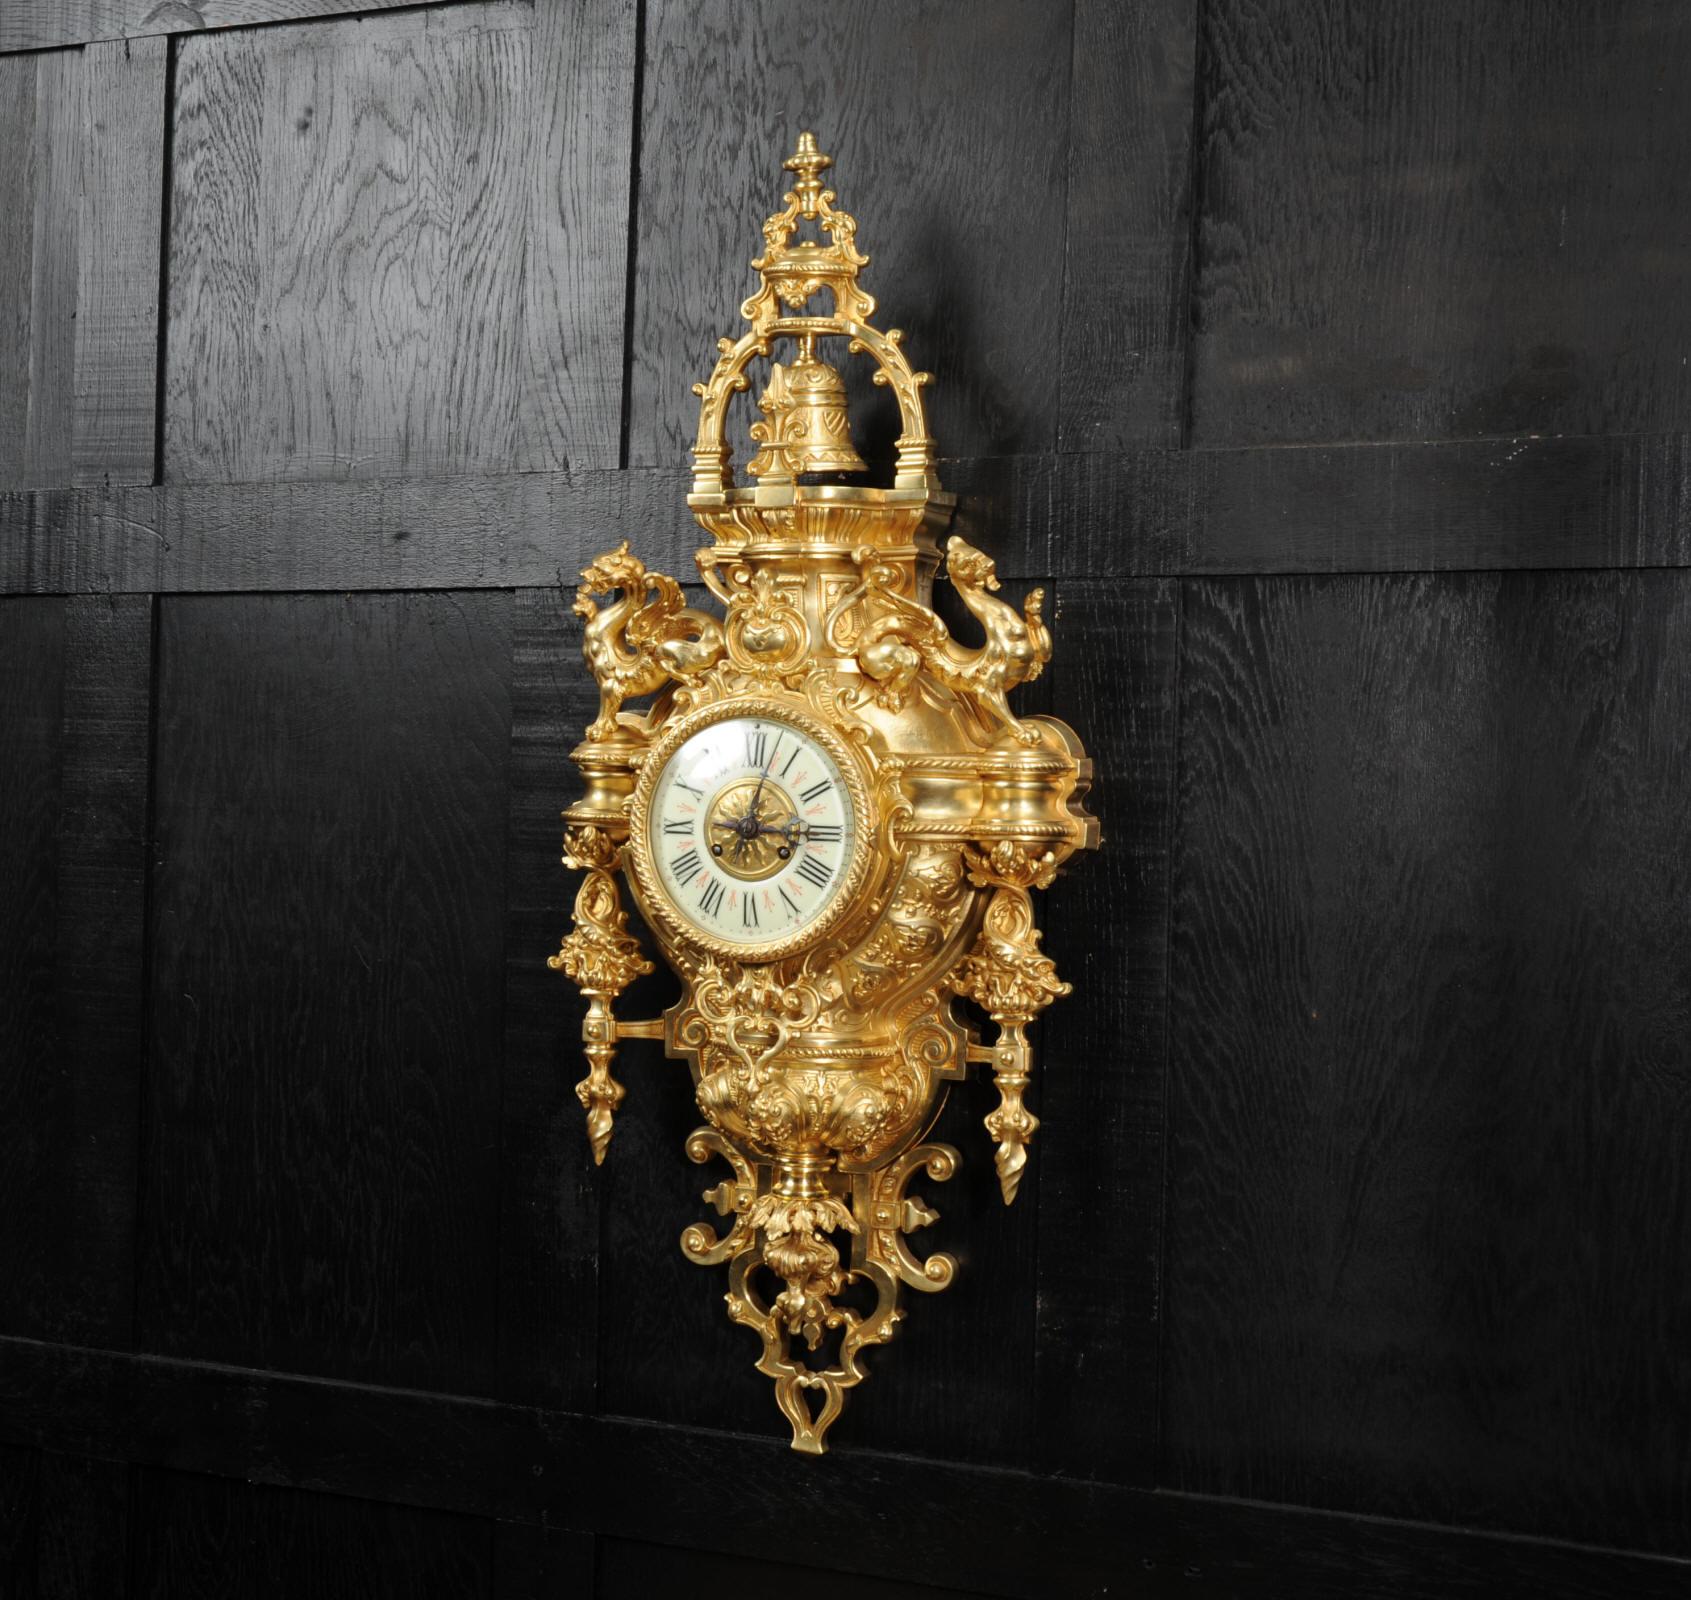 19th Century Huge Antique French Gilt Bronze Cartel Wall Clock with Dragons